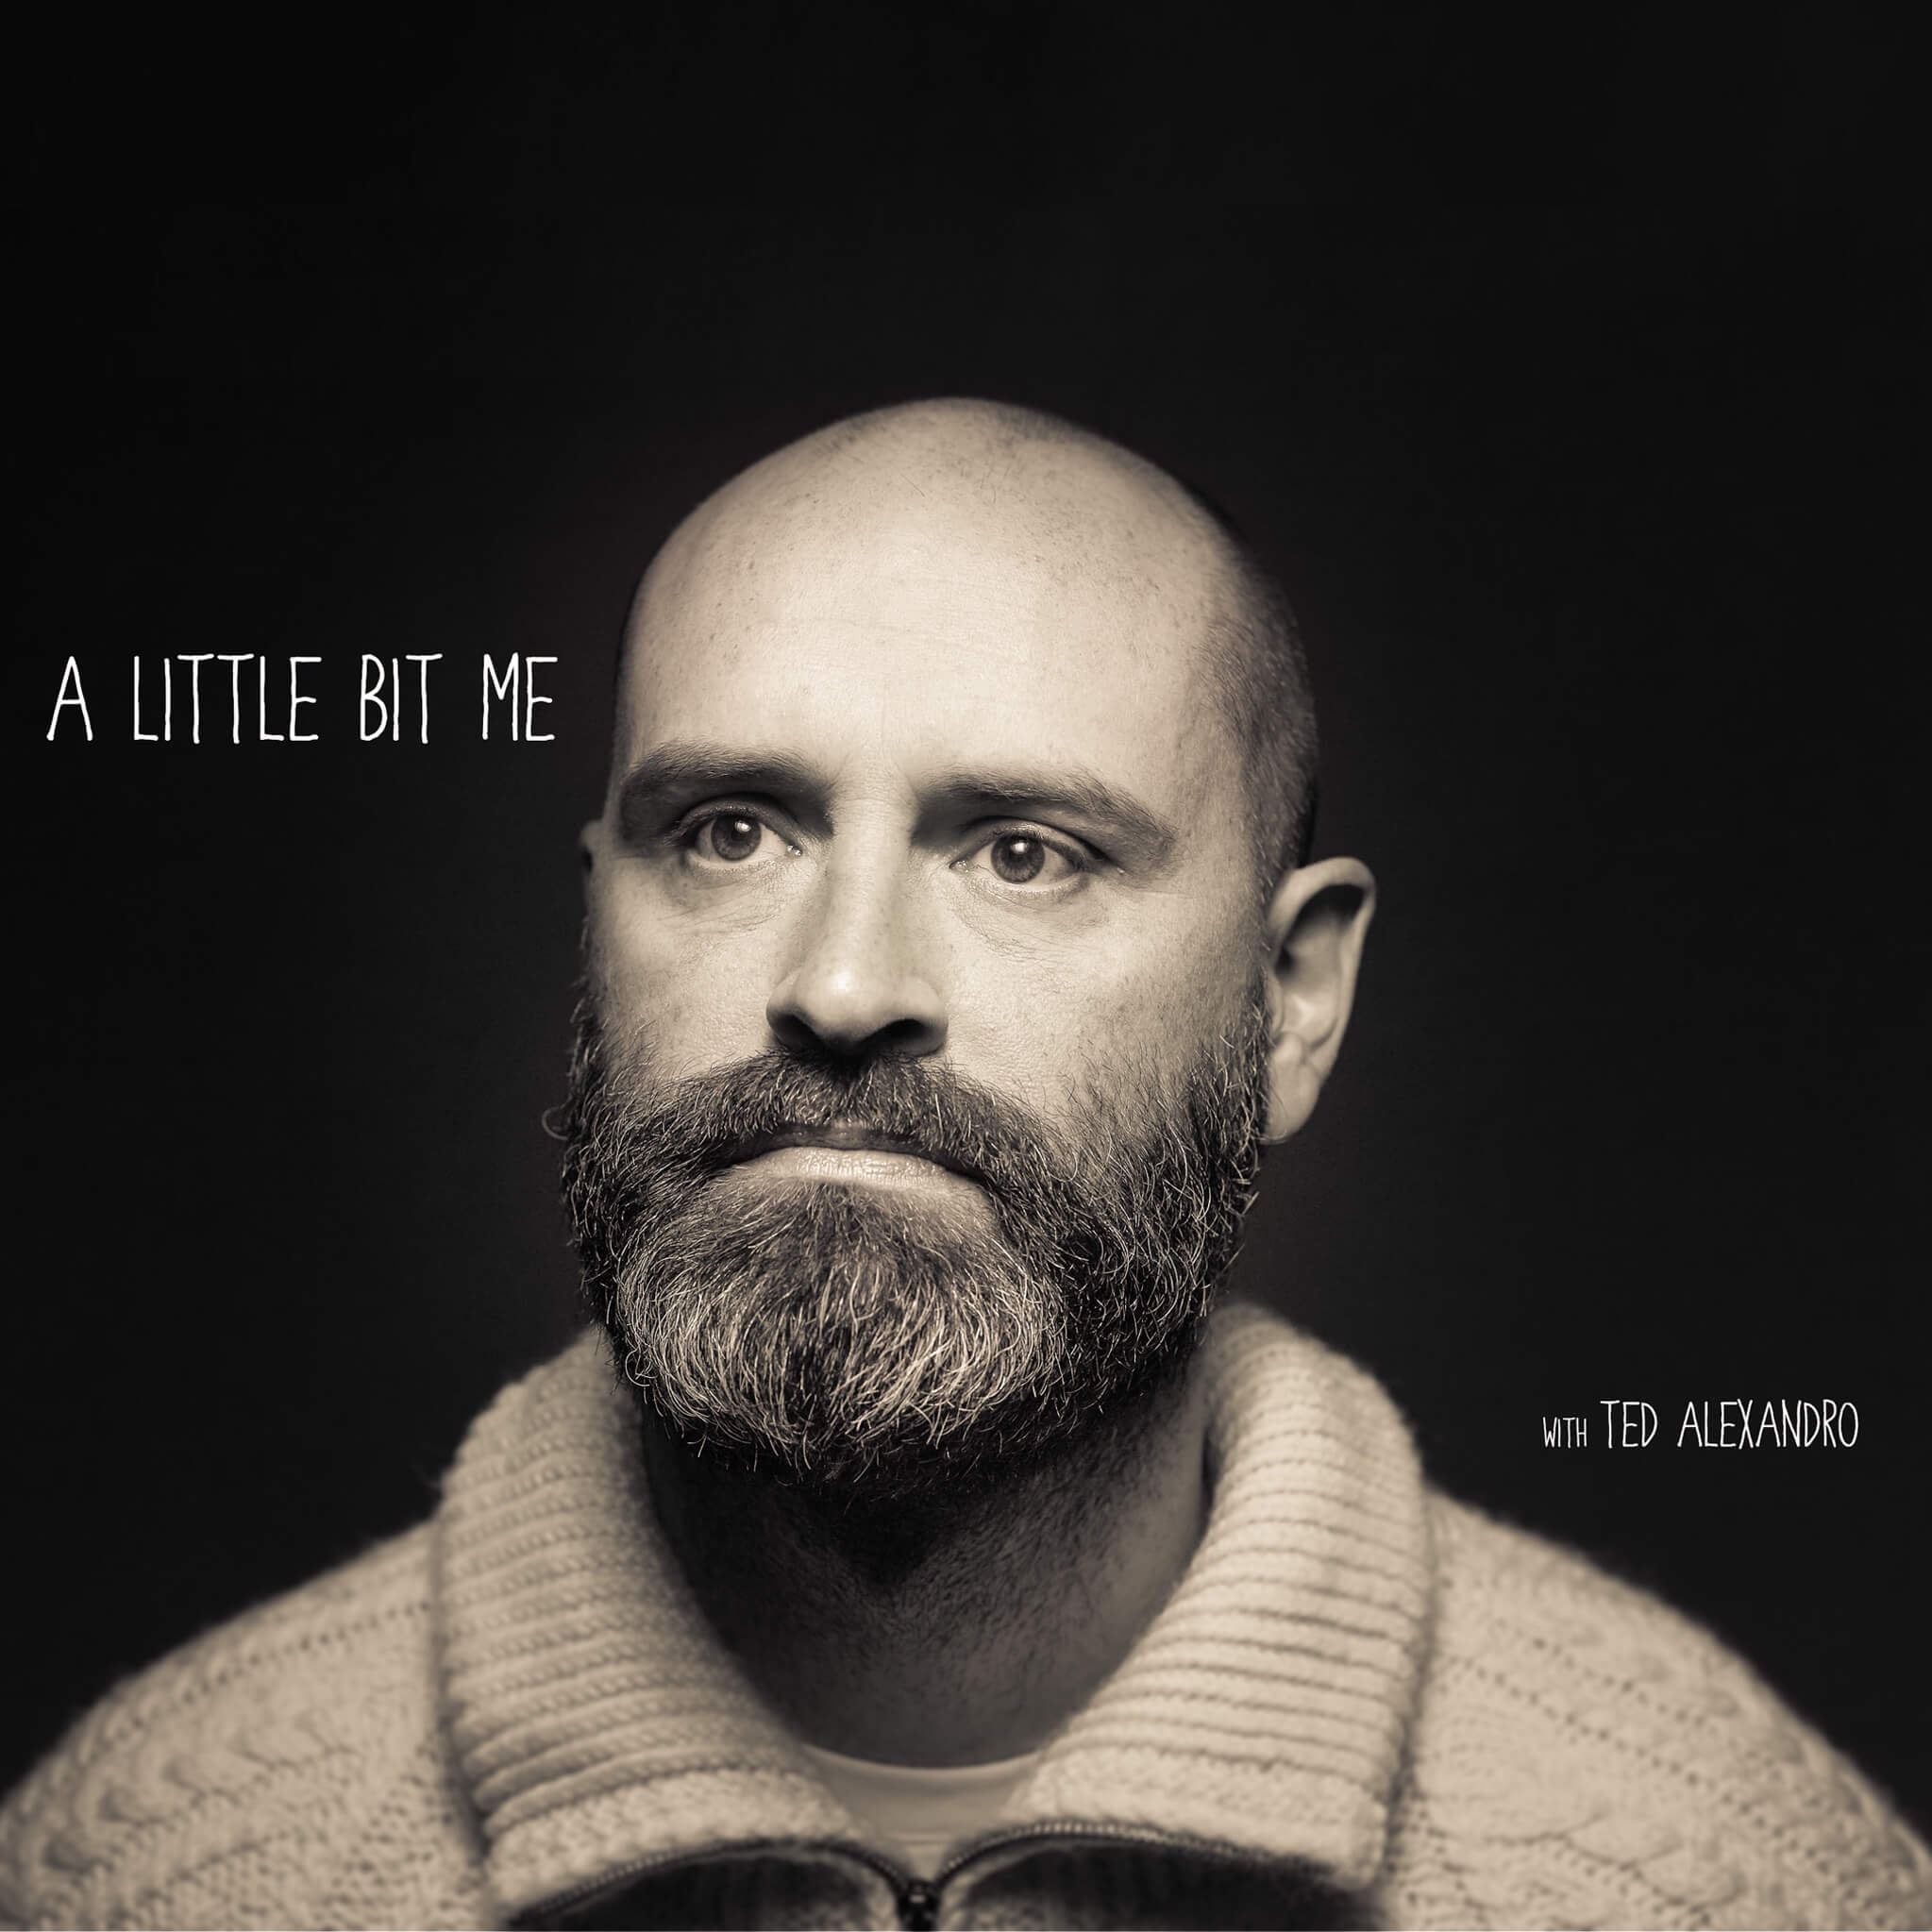 A Little Bit Me: A Glimpse into Podcasting with Ted Alexandro